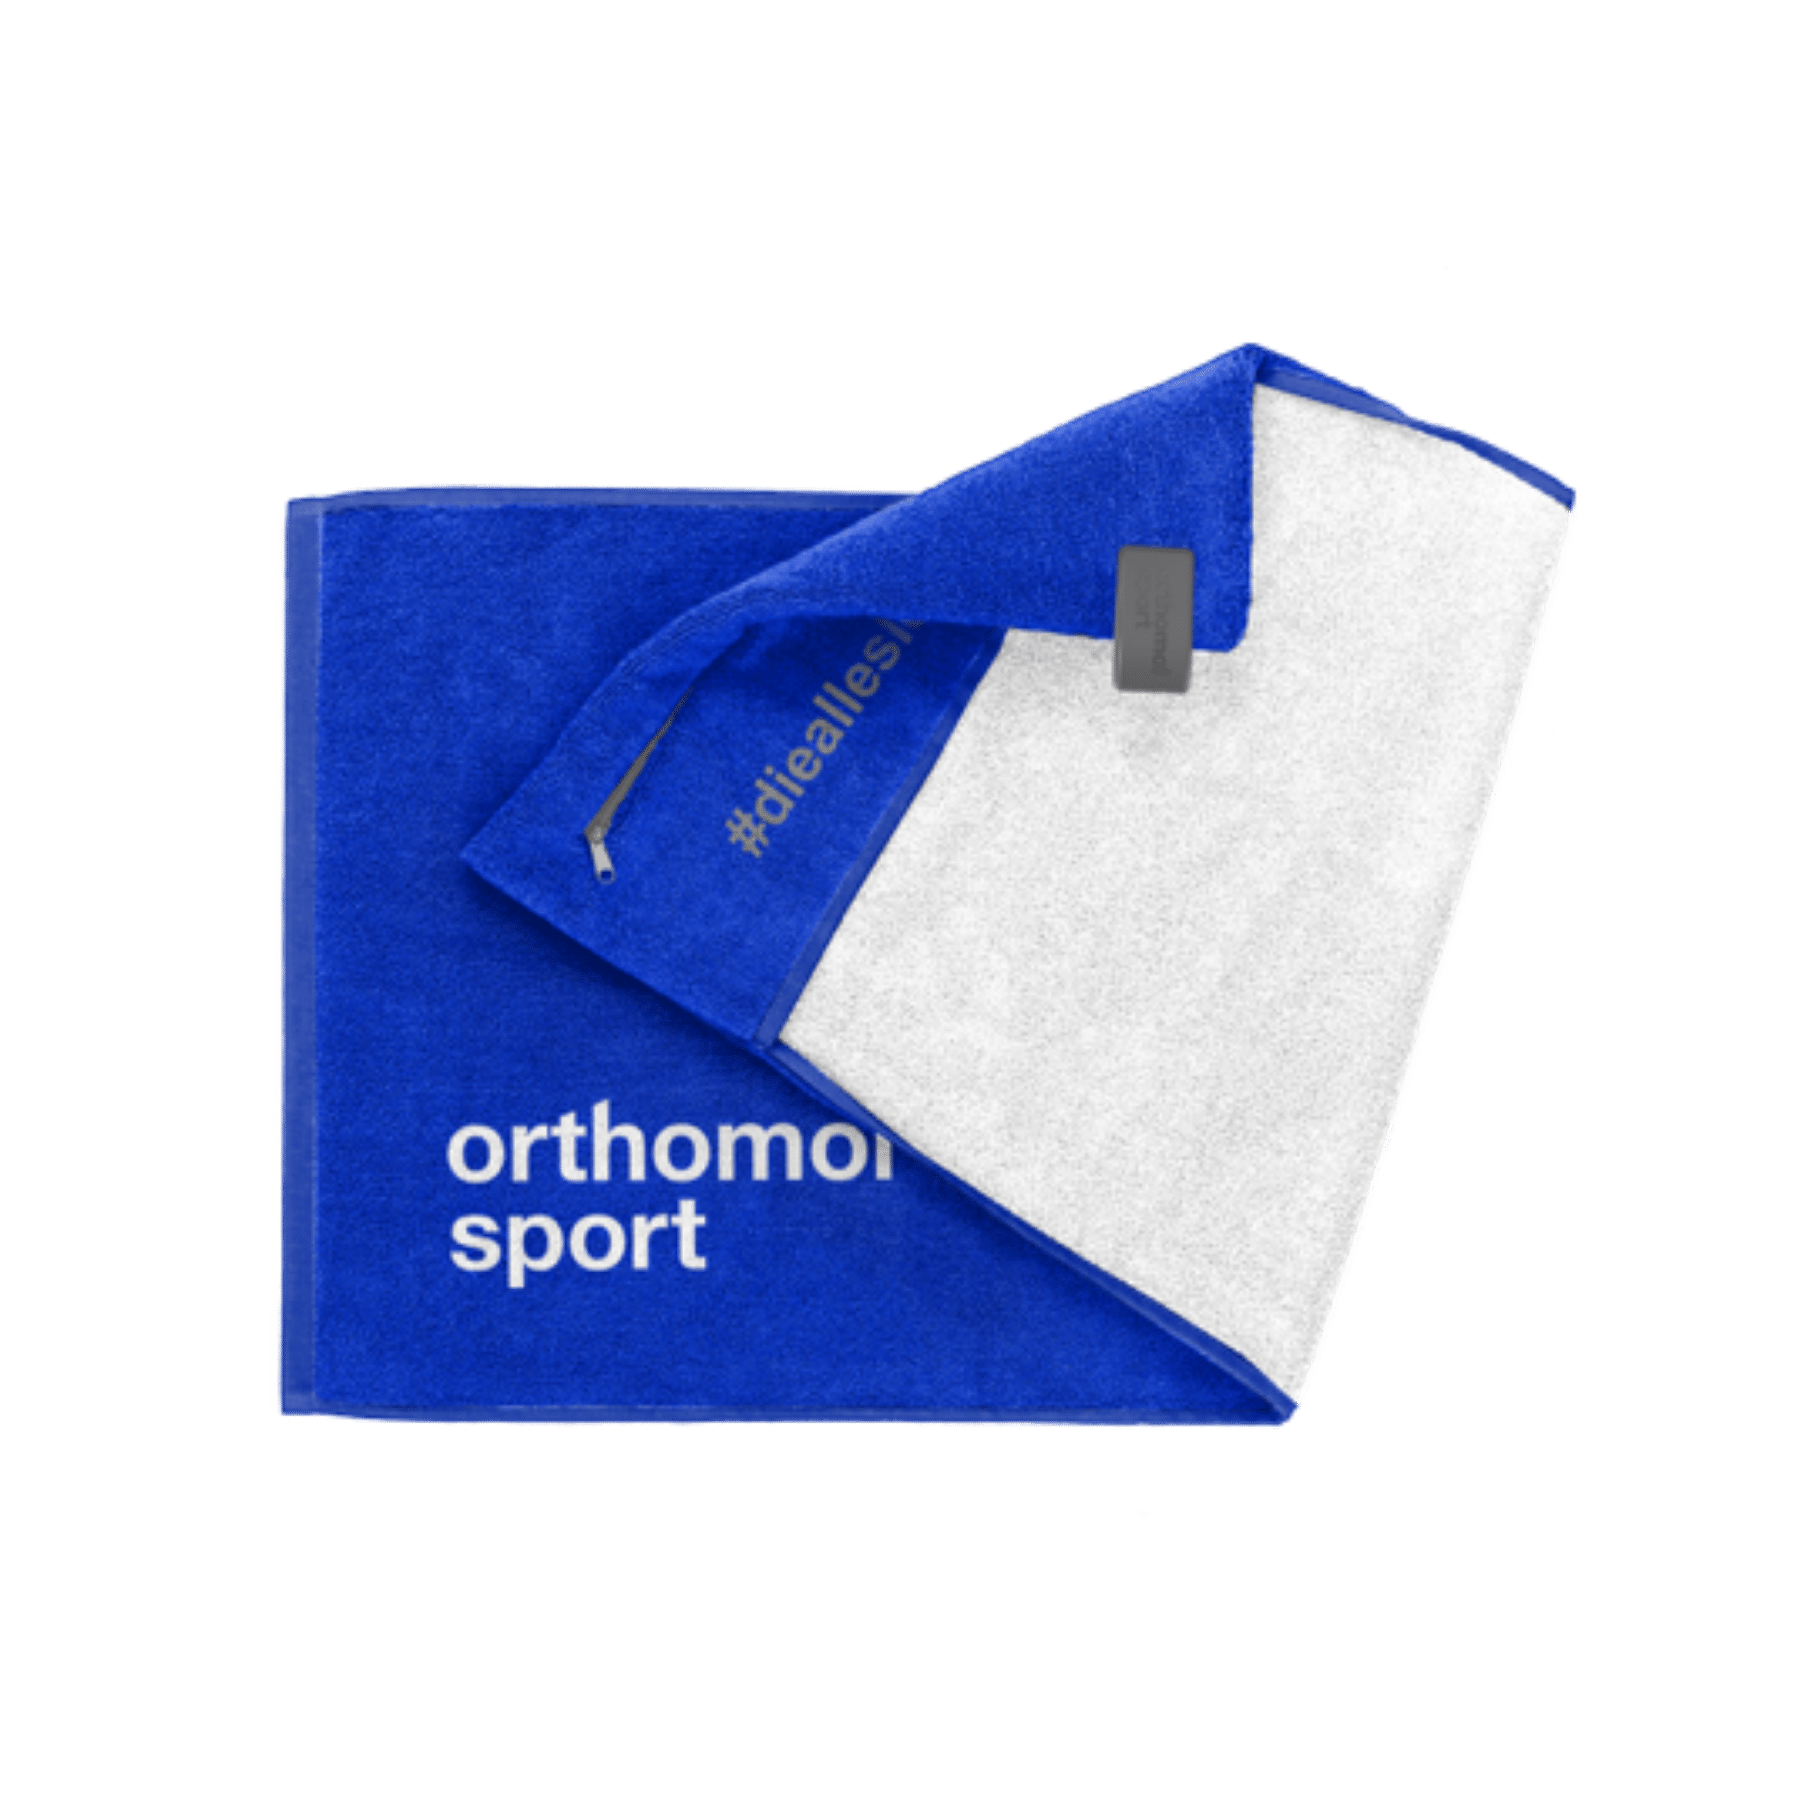 Orthomol Sport STRYVE Towell+ Pro Handtuch